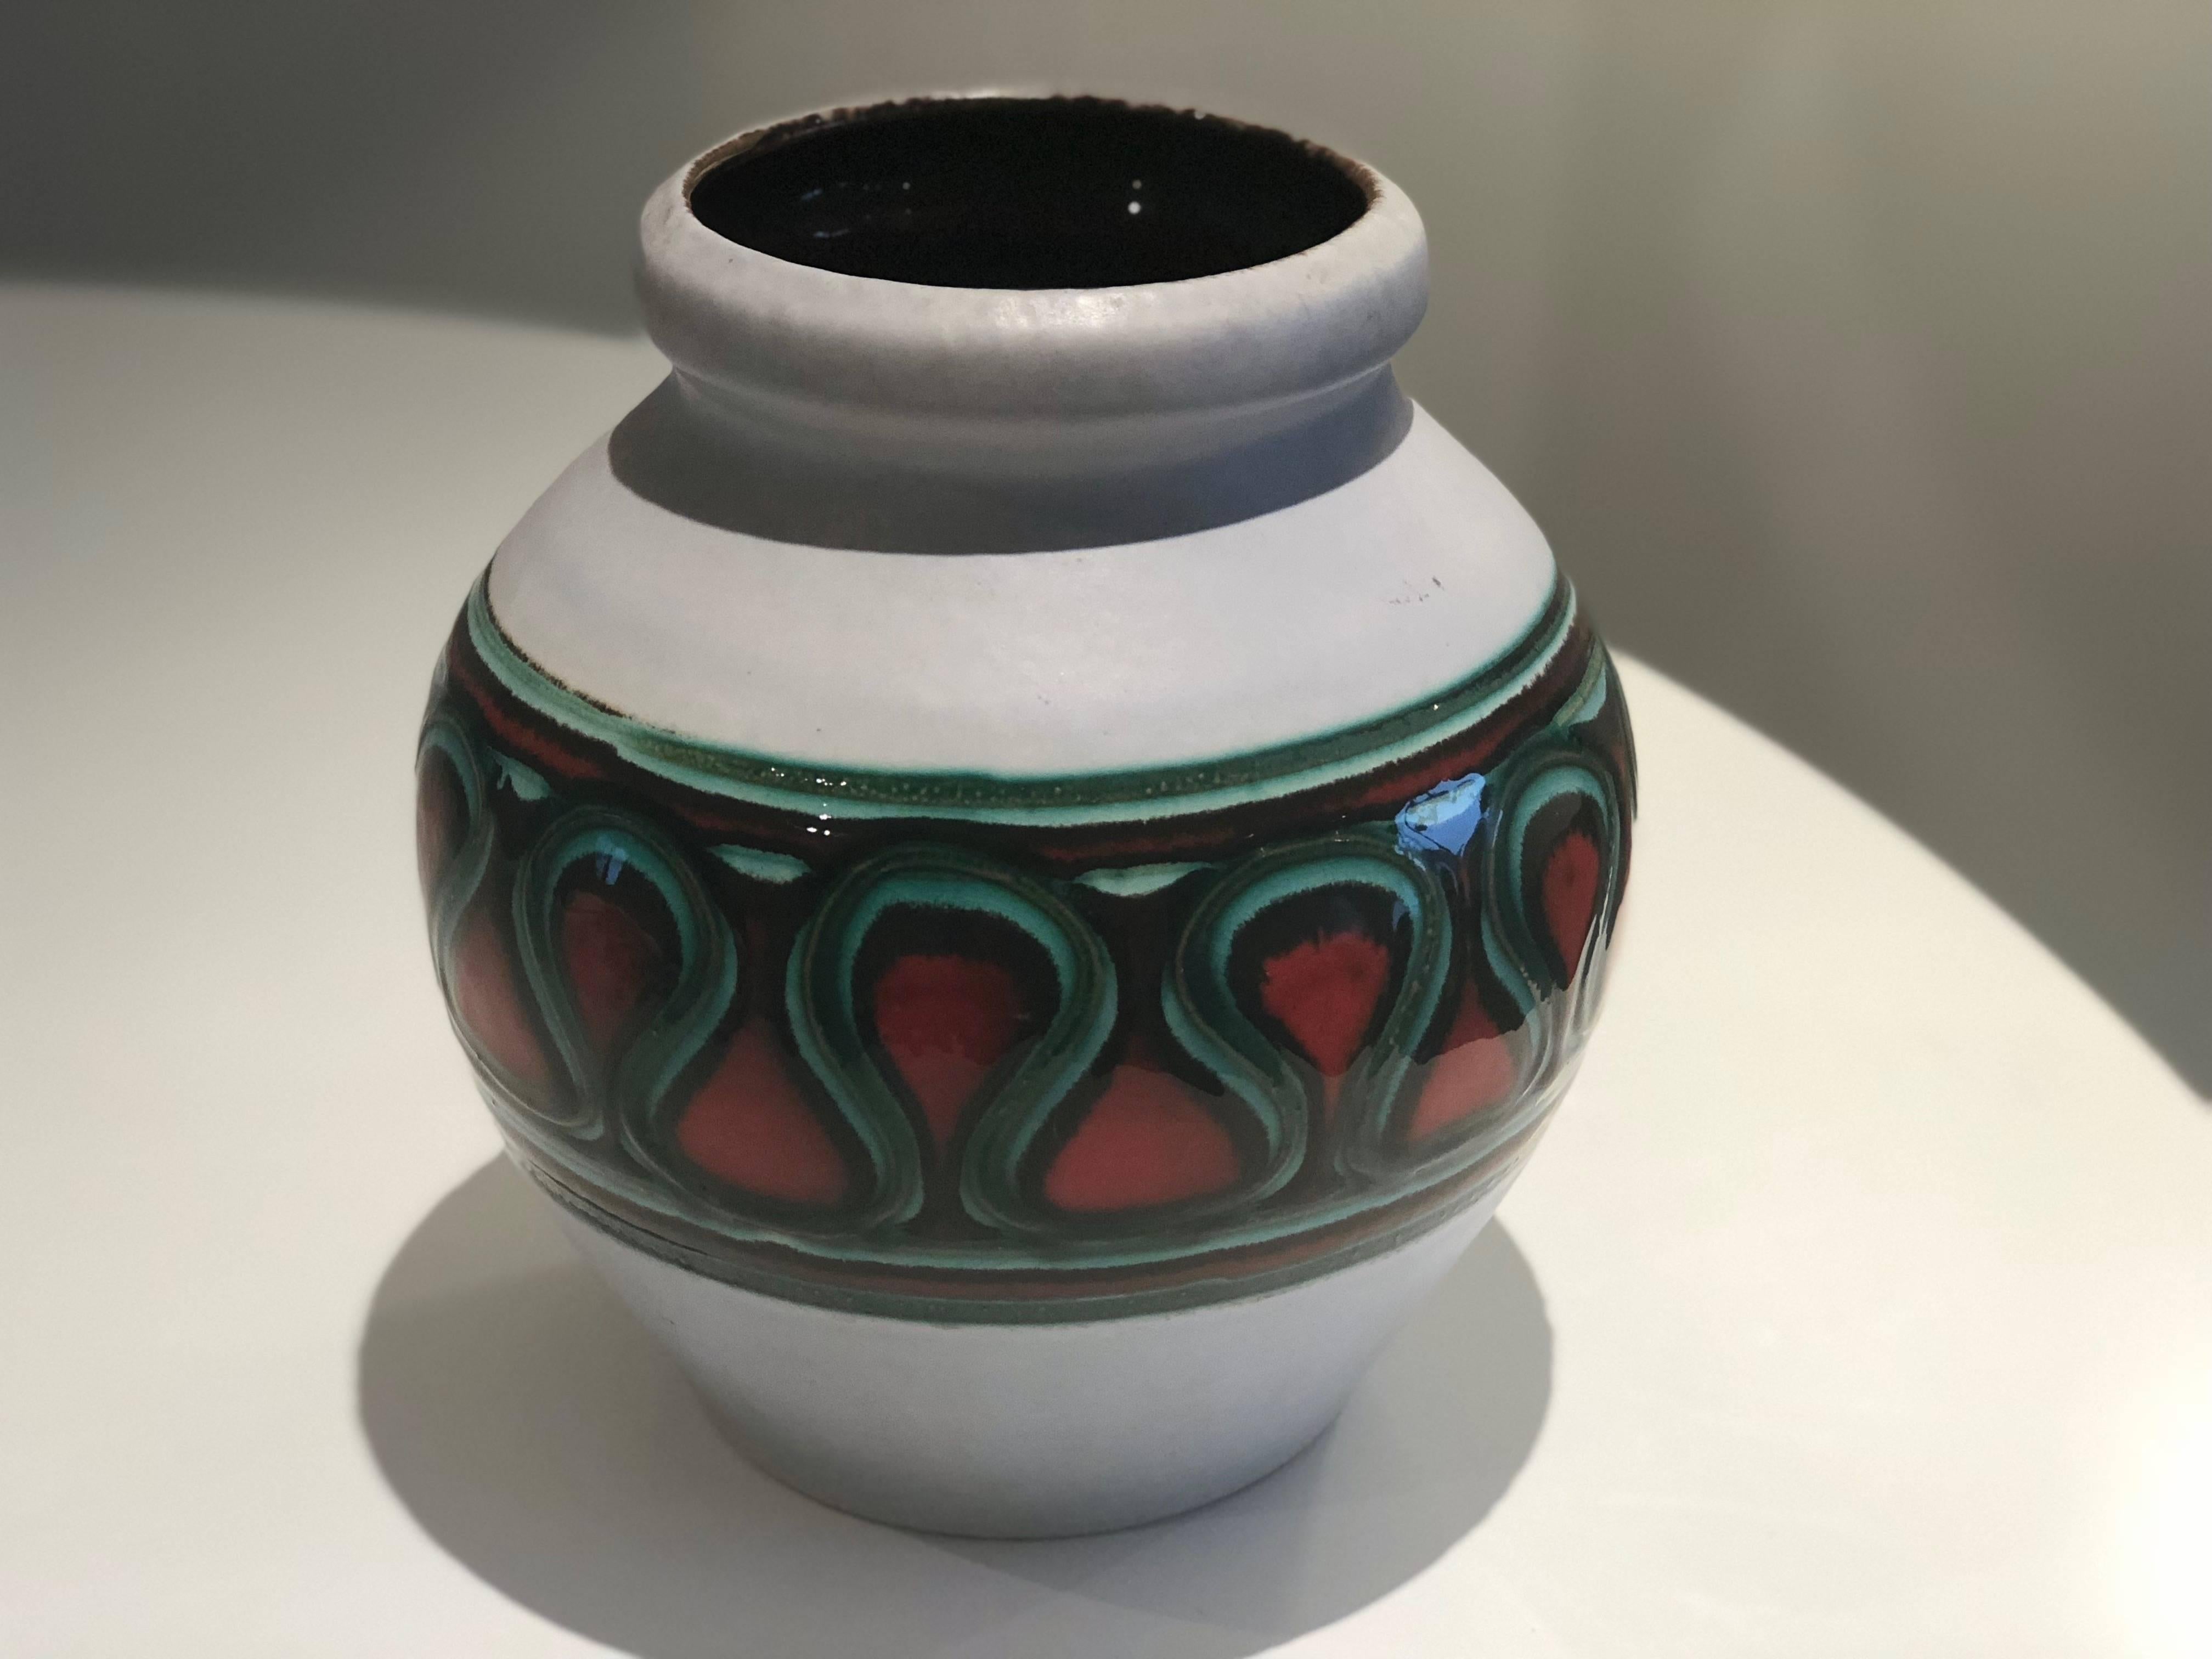 20th century vintage West German Bay Keramik round flower or decorative ceramic vase composed of a light grey base with red green and black collar pattern.